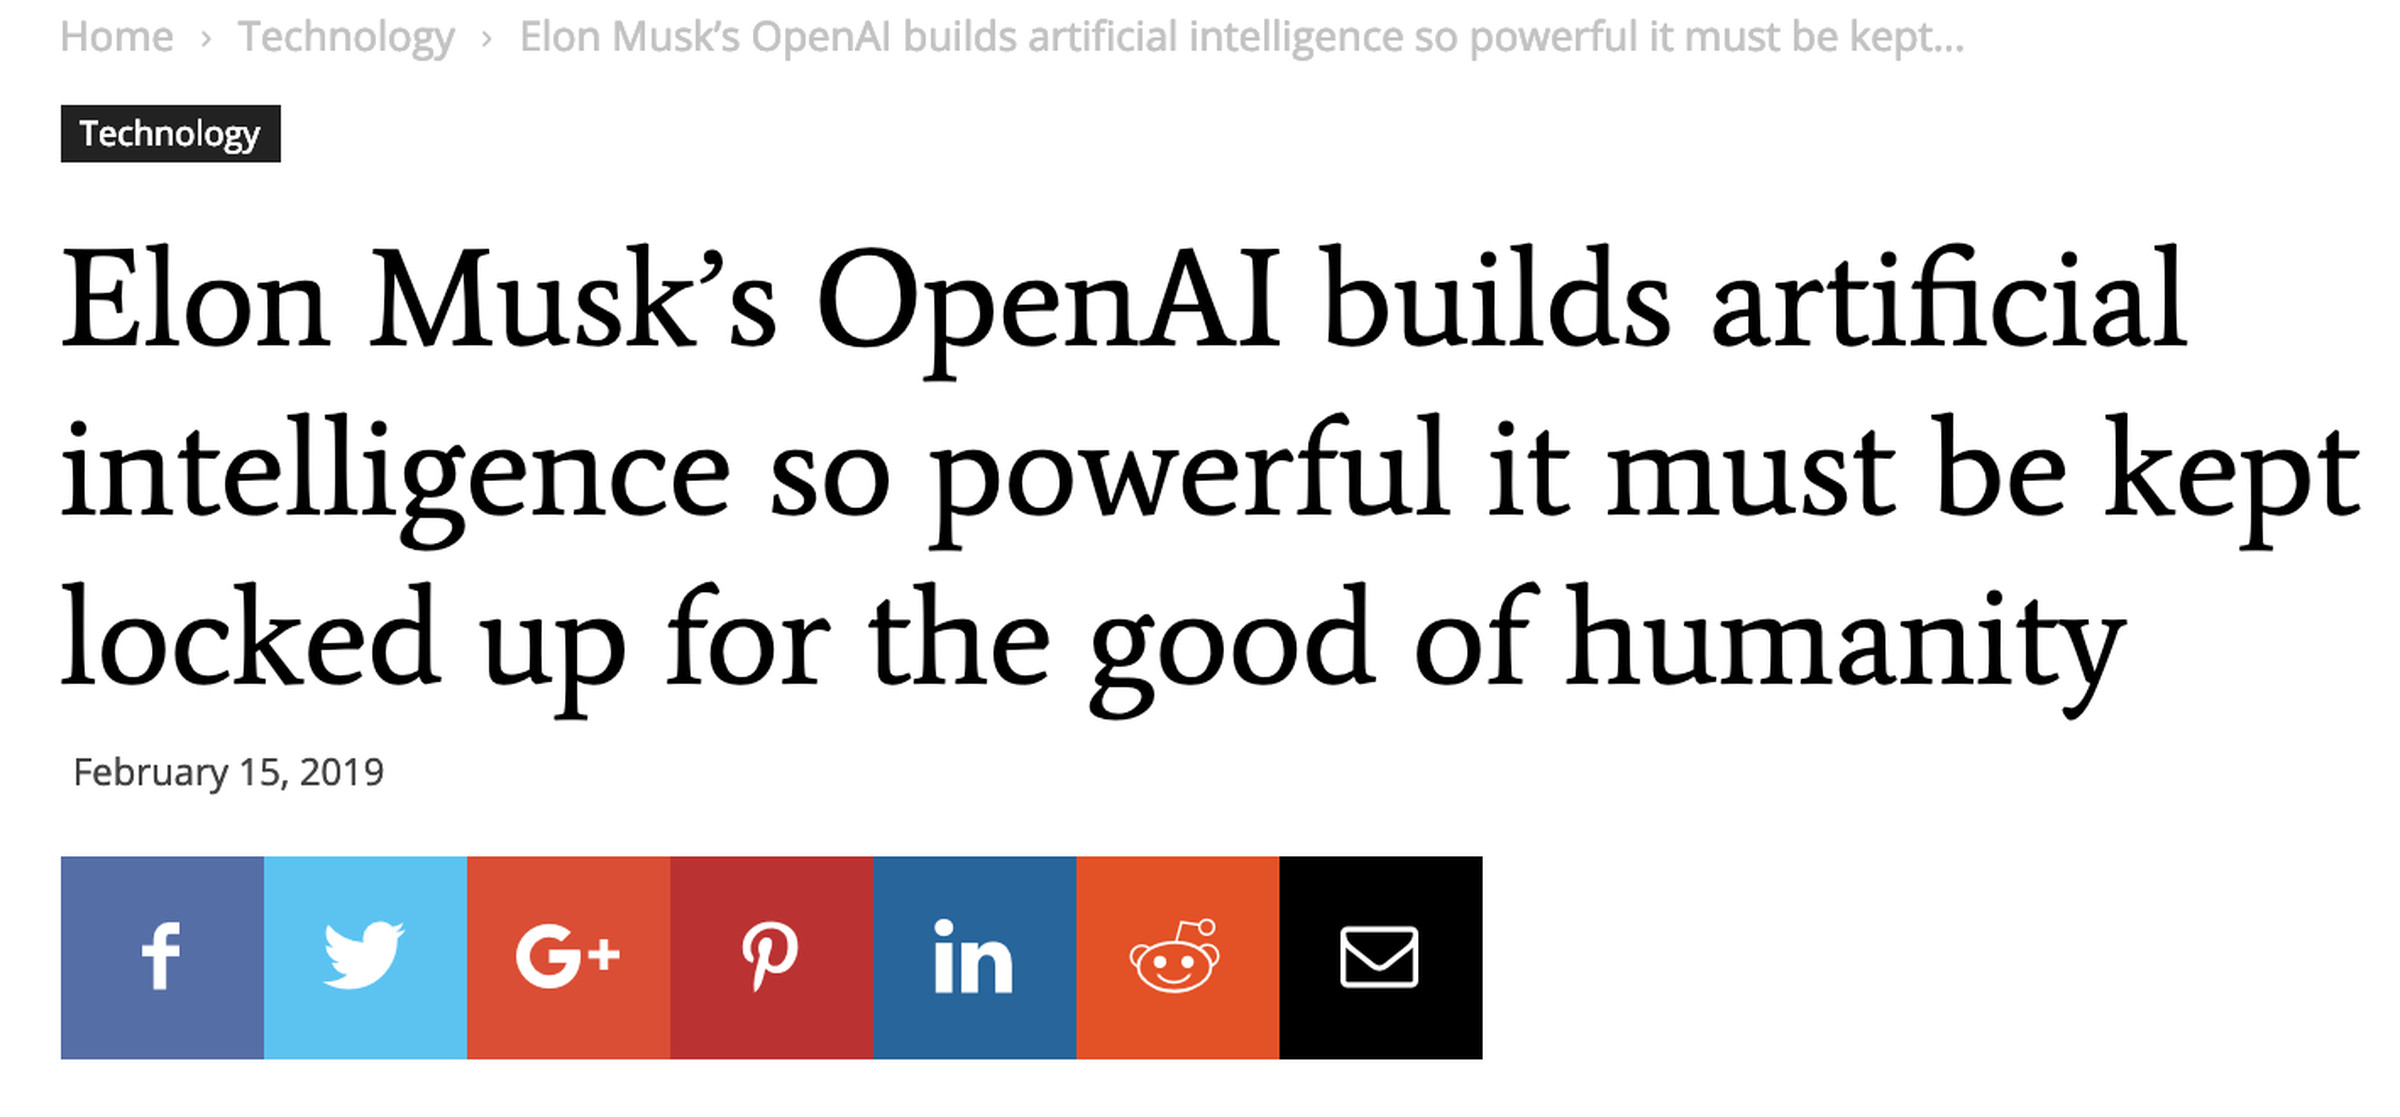 A lot of coverage of GPT-2 focused on OpenAI withholding the full model.